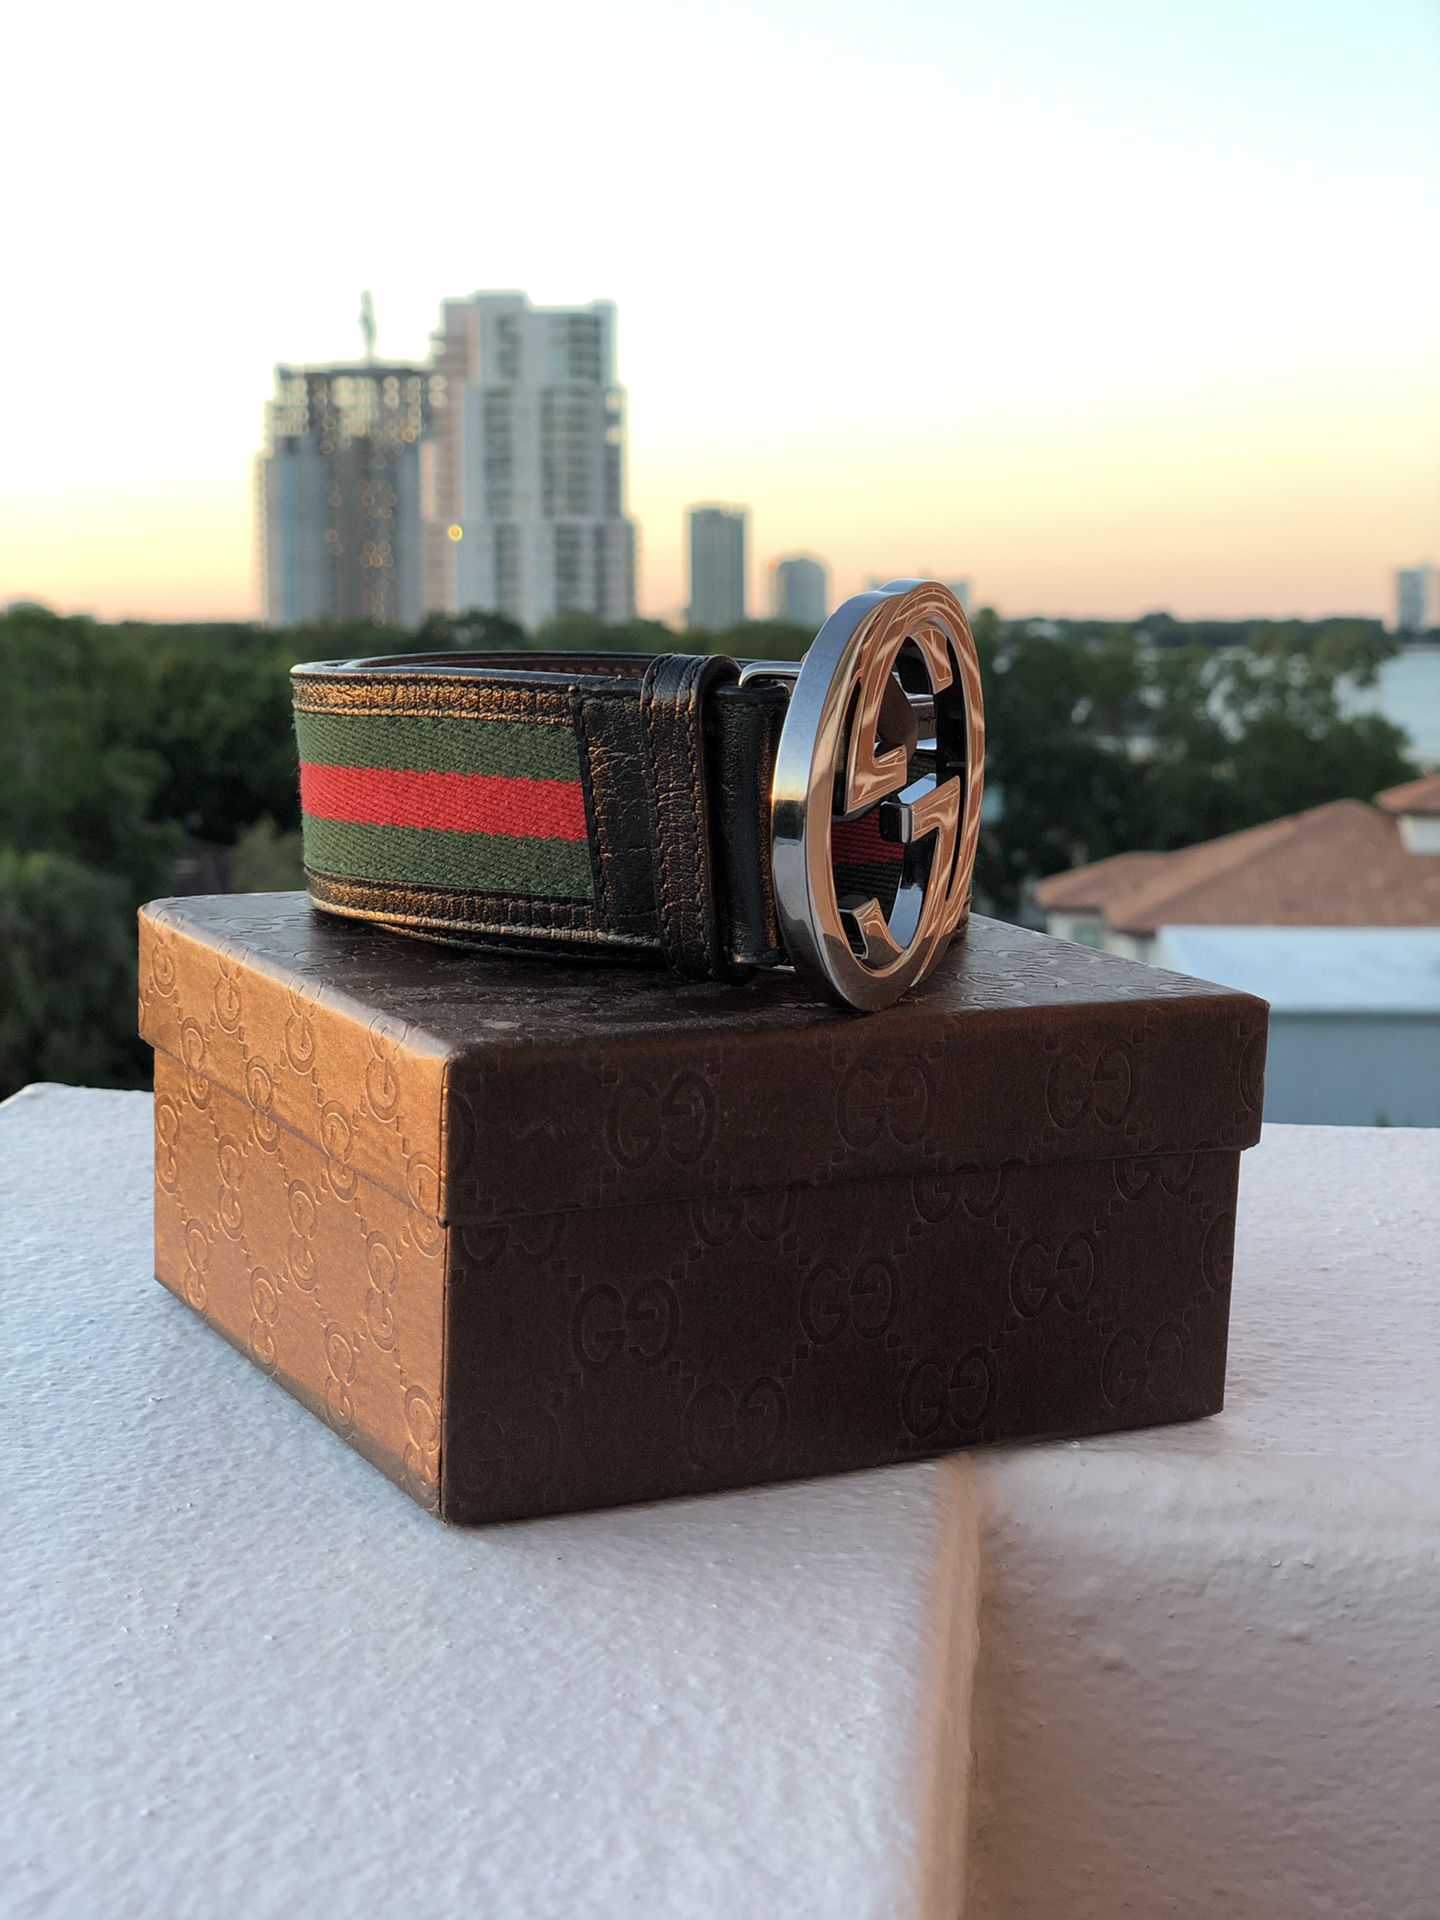 Authentic real Gucci belt. 34